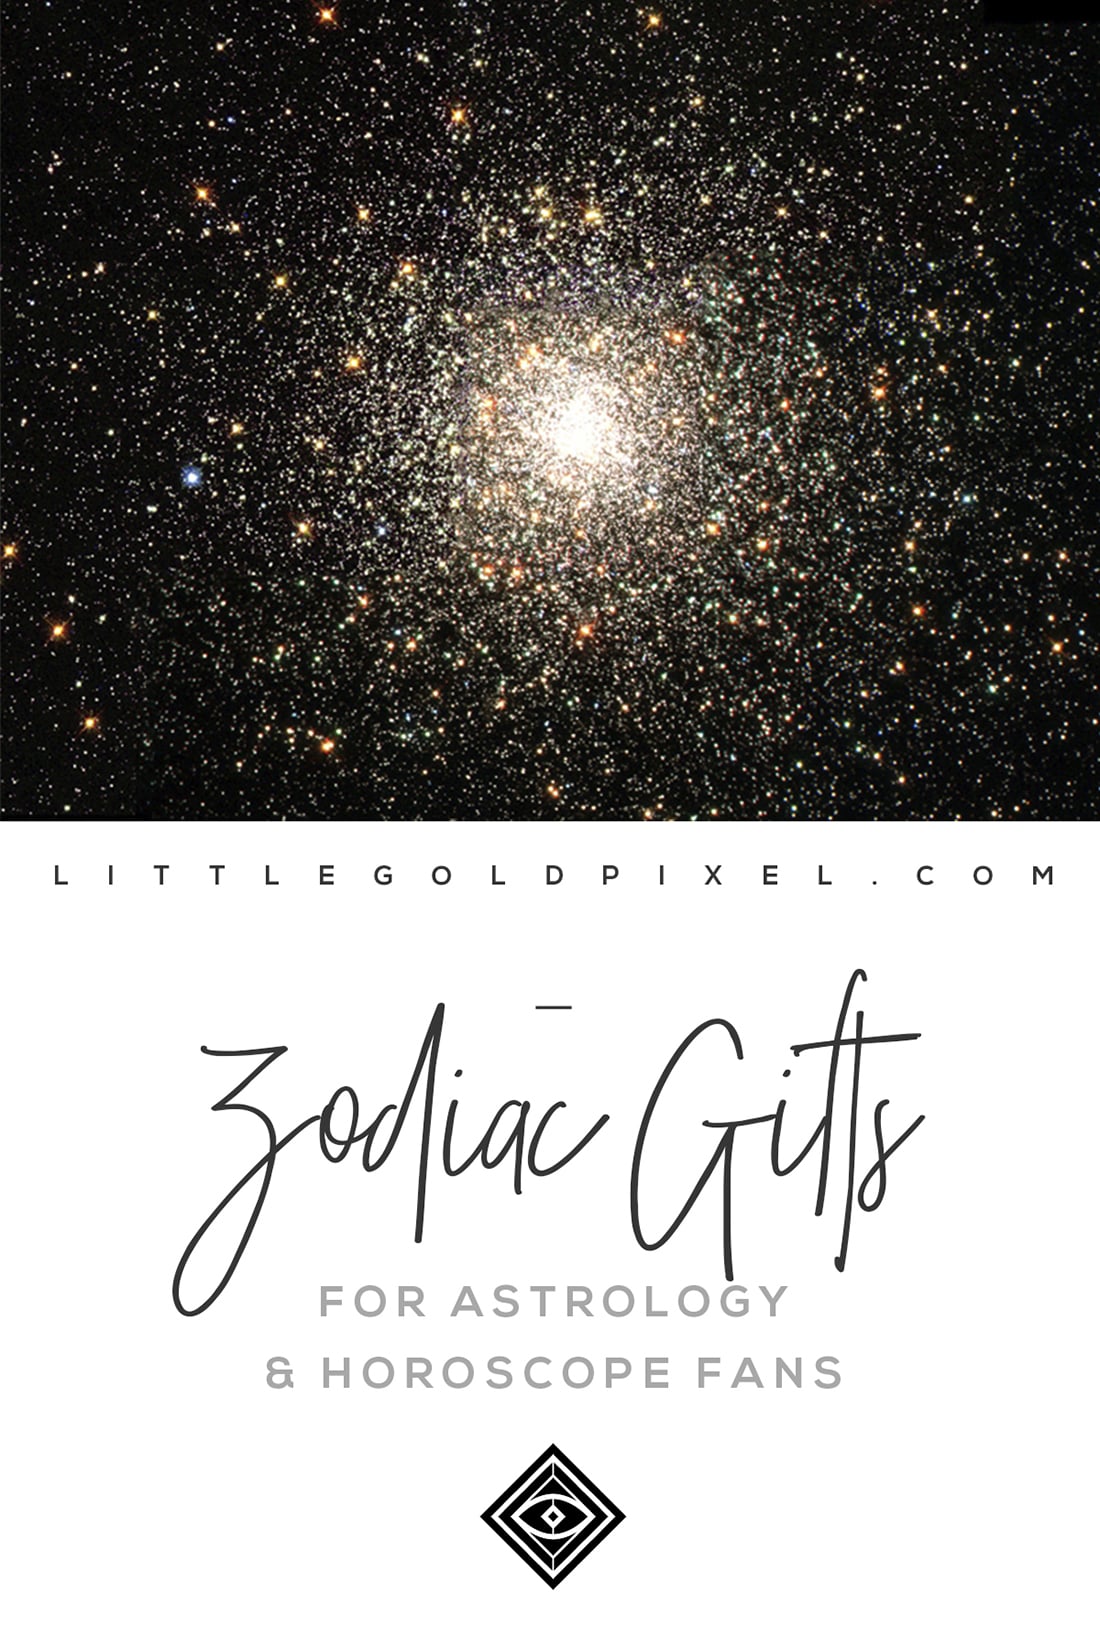 Zodiac Gifts • Horoscope Gifts • Astrology Gifts • Little Gold Pixel